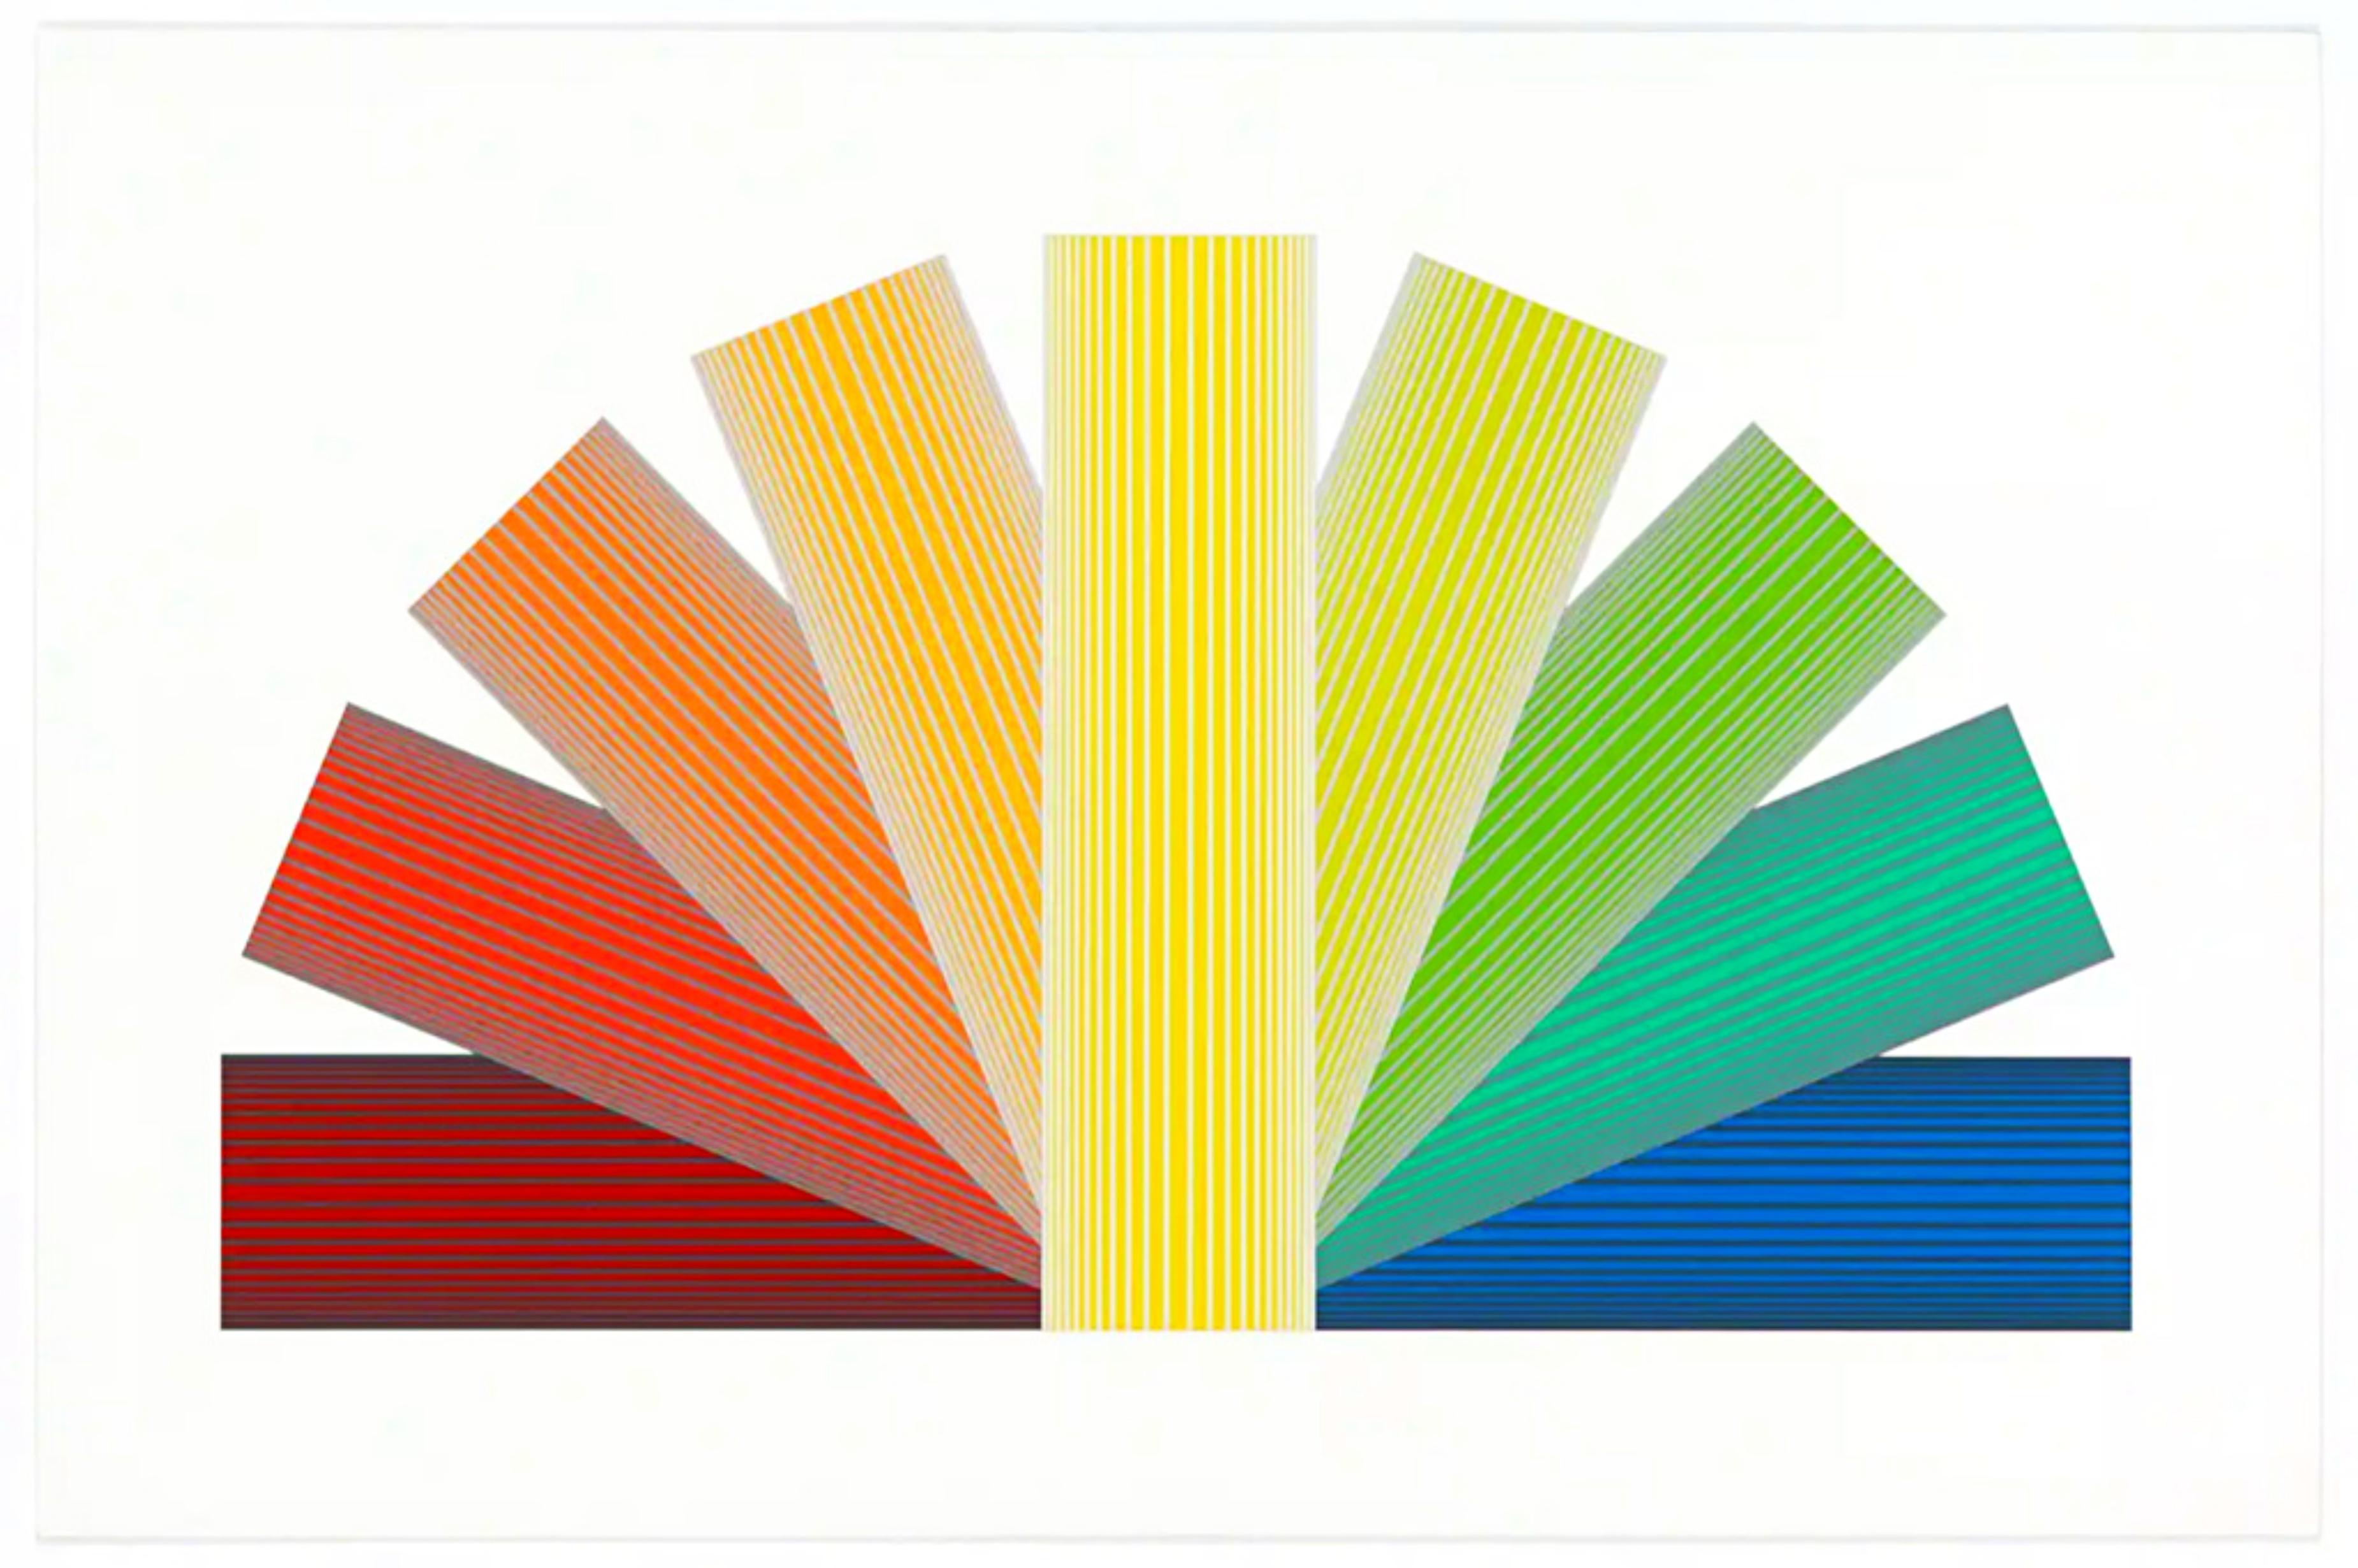 RICHARD ANUSZKIEWICZ
Grey Tinted Rainbow, 1992
Assemblage with 14 Color Silkscreen and Lithograph
Edition of 40
Pencil signed and numbered 11/40 on the front
Frame included: elegantly framed in a wood frame
Gorgeous 14 color mixed media assemblage -